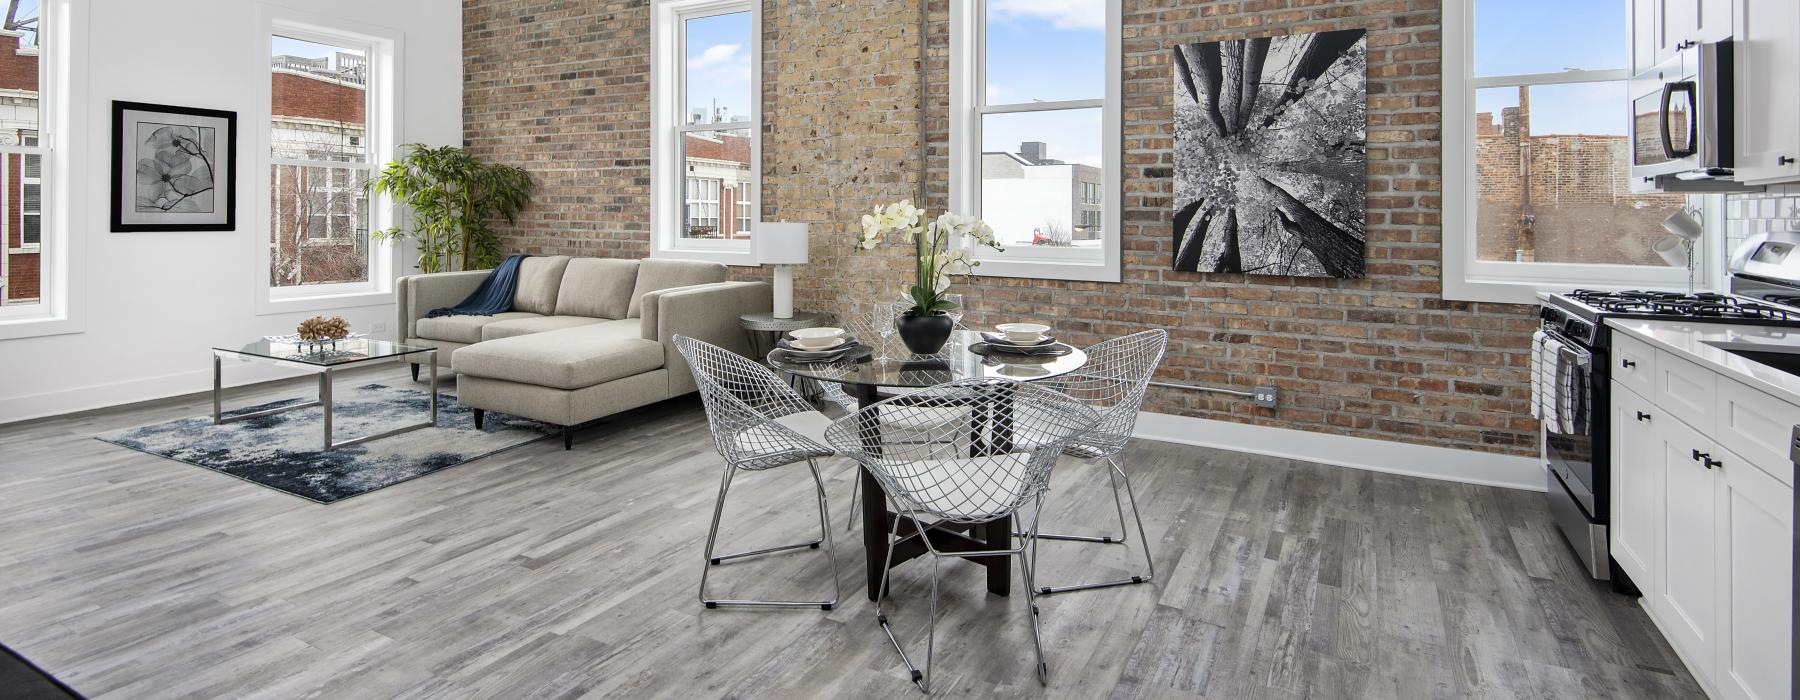 windows with city views in living areas with brick wall